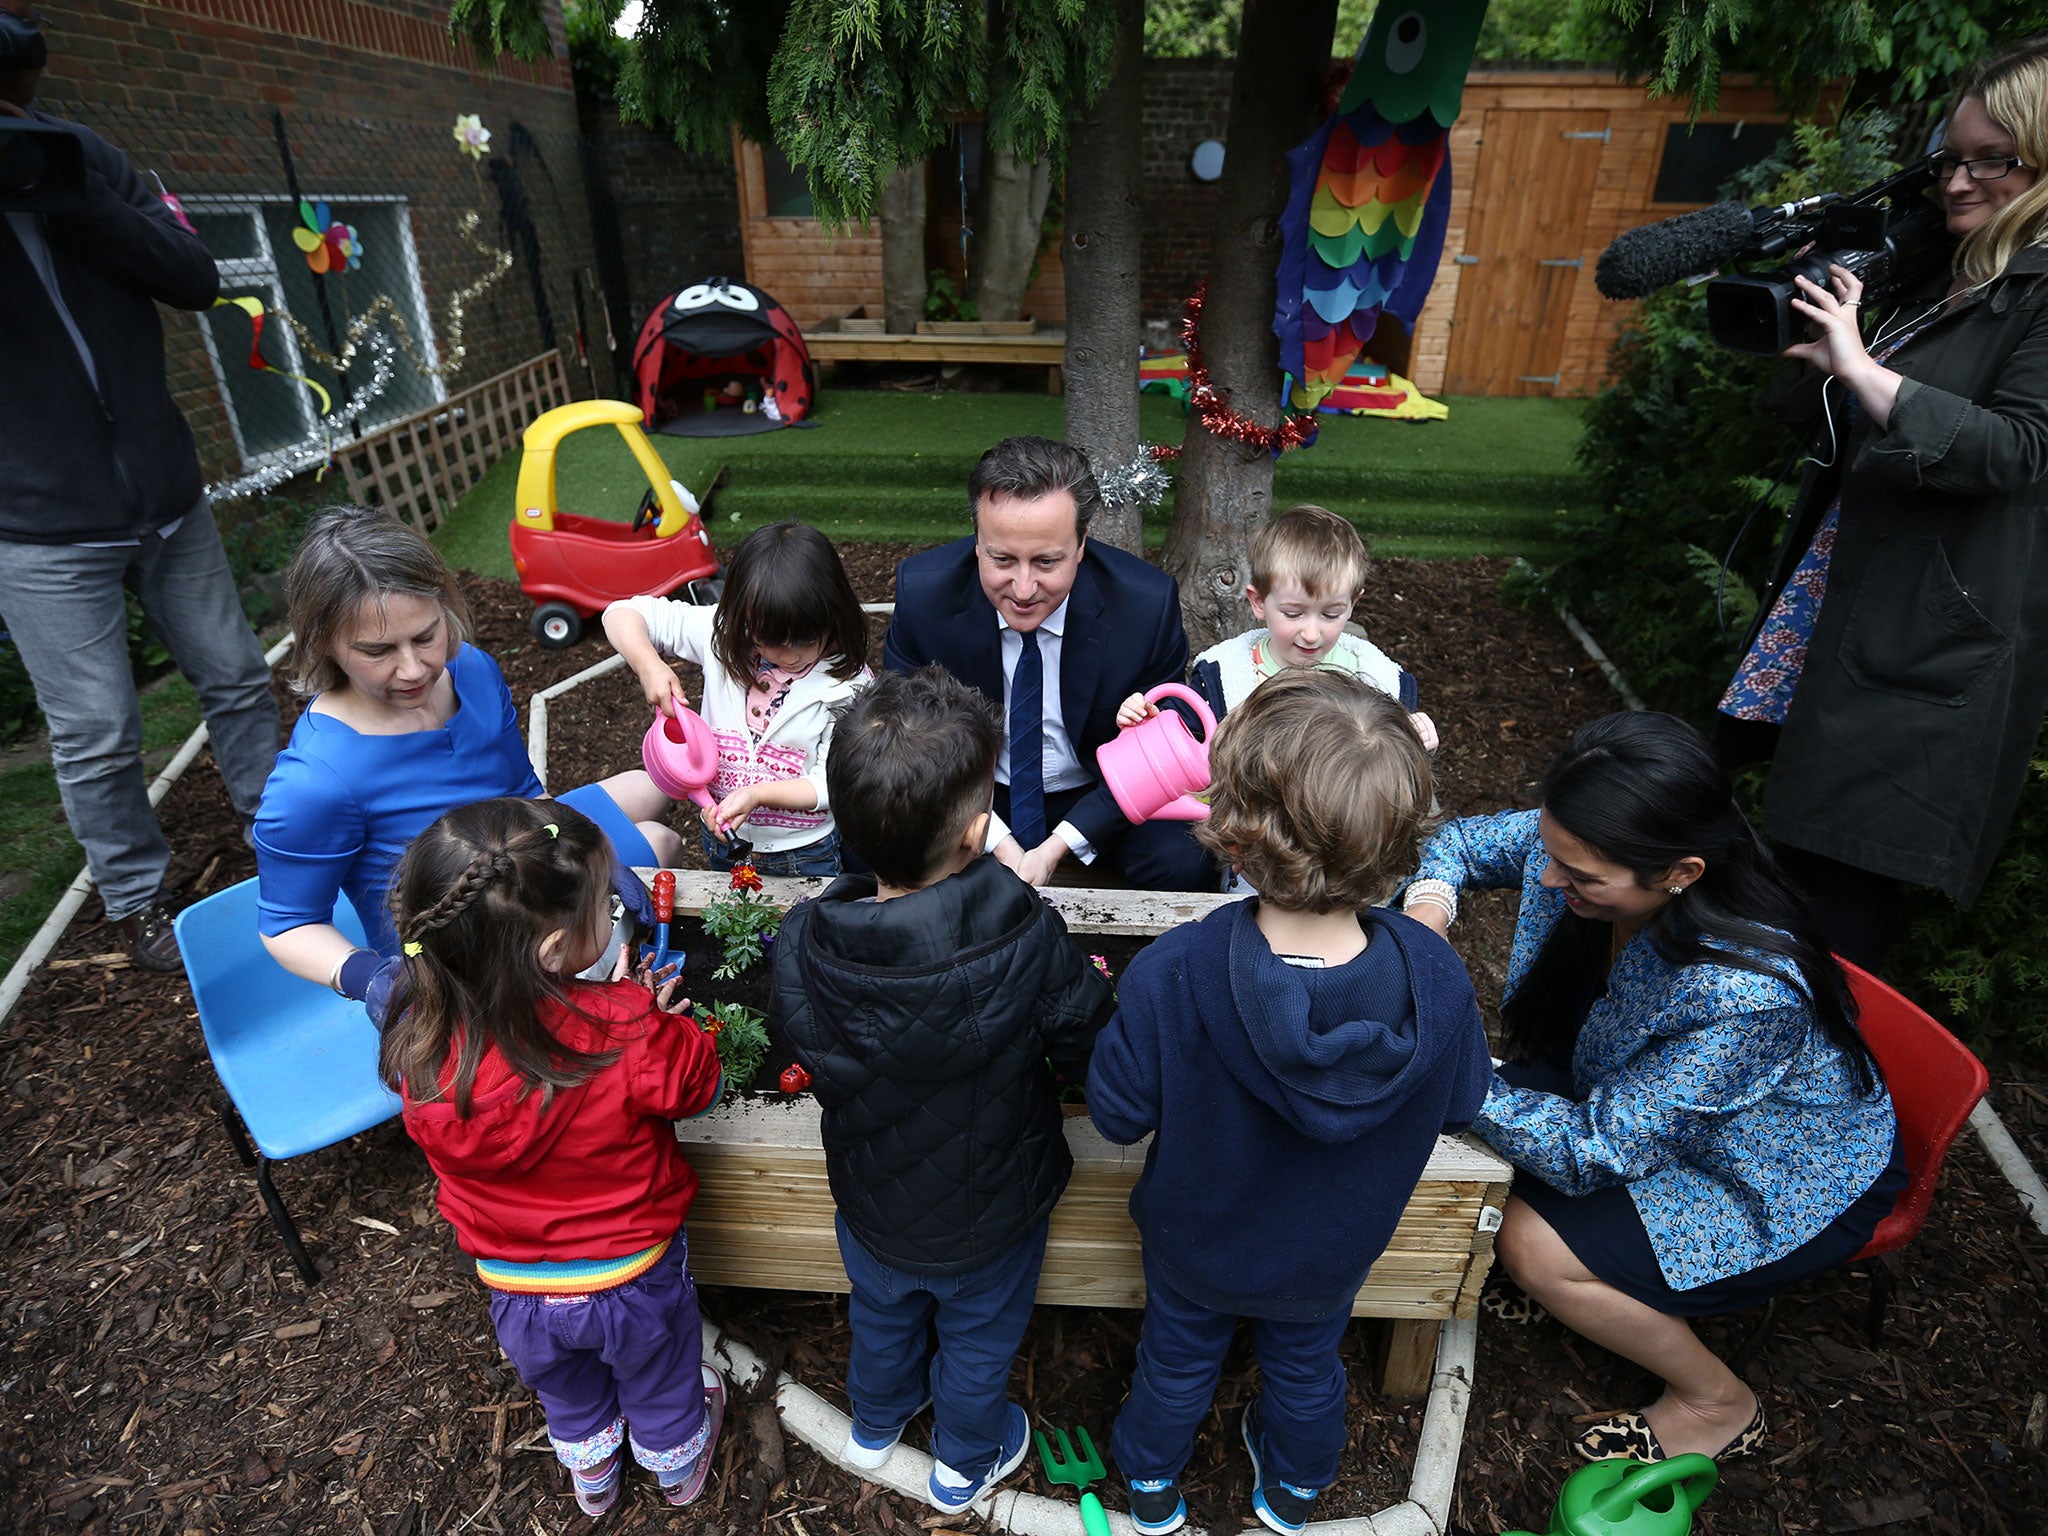 David Cameron’s manifesto included 30 hours of free childcare